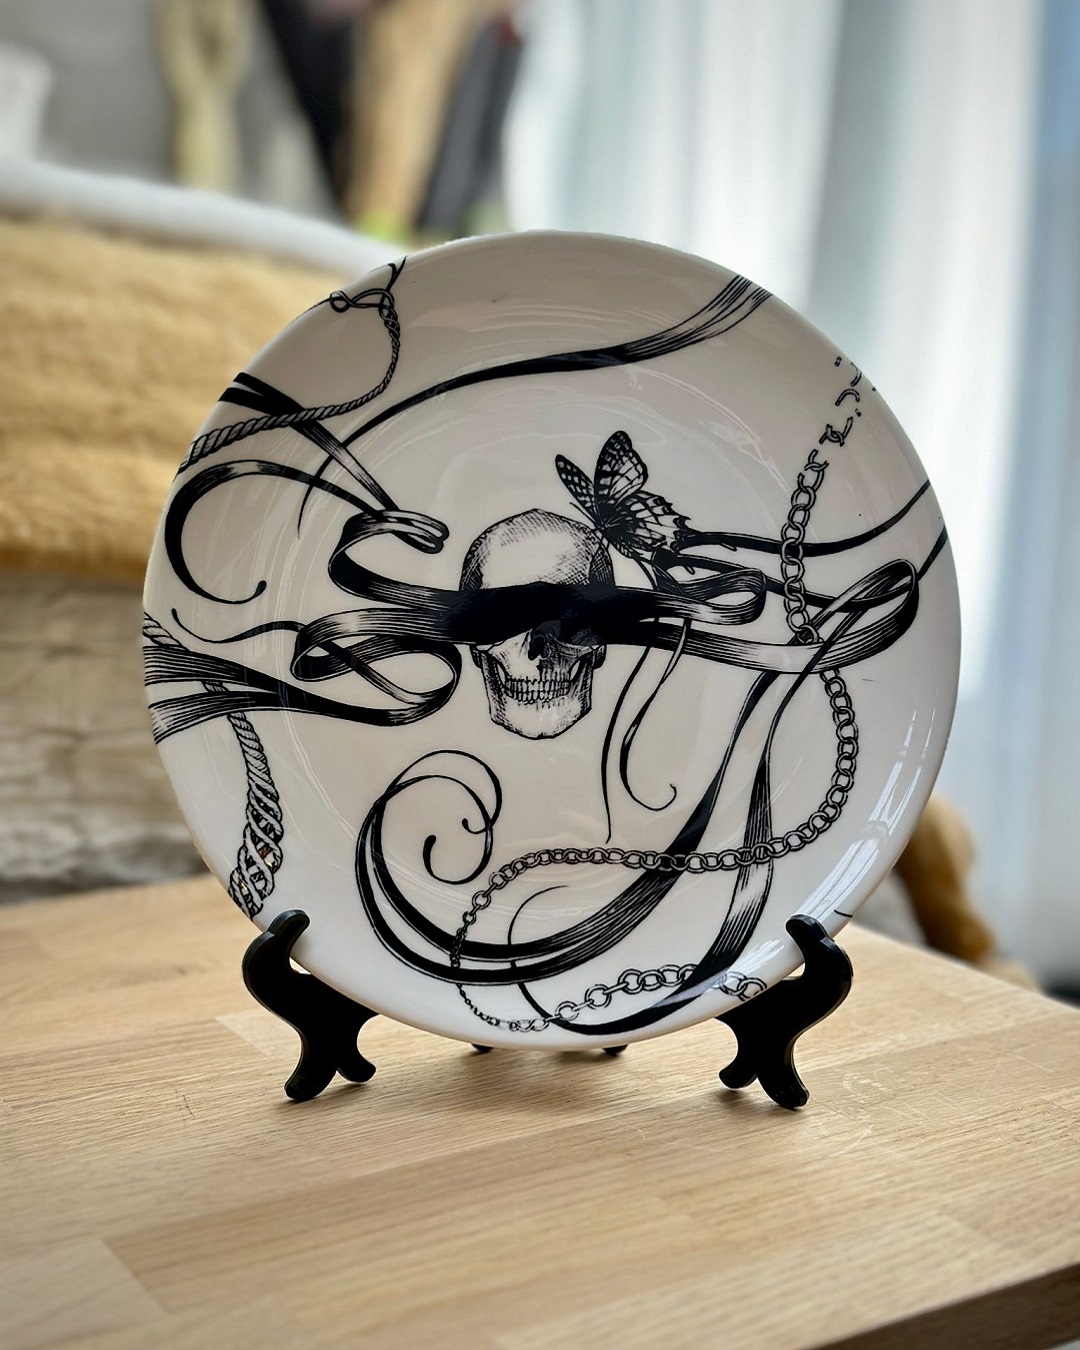 Round white plate in plate stand with black skull and ribbons on it